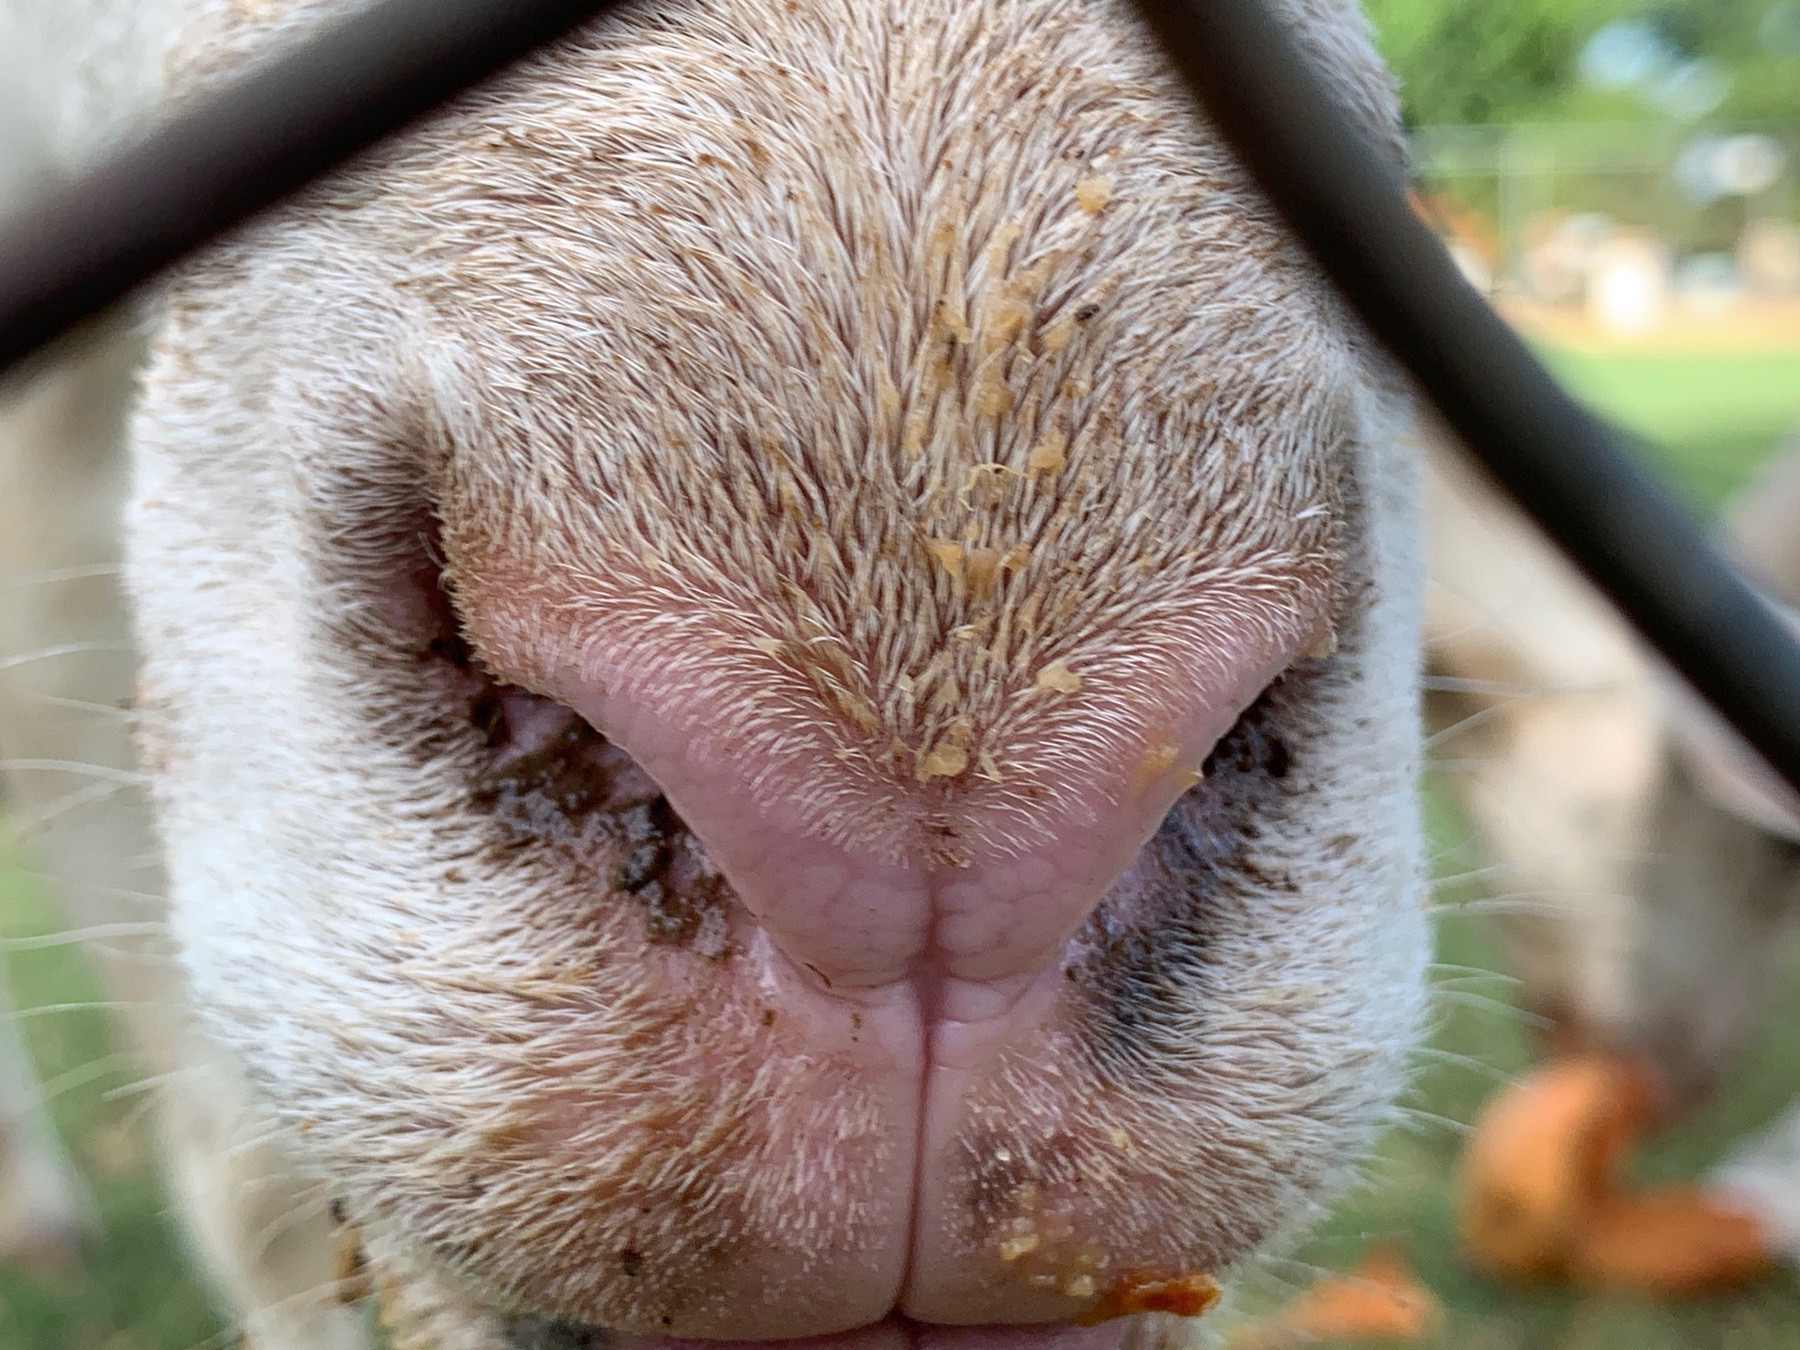 very close up view of a sheep's nose